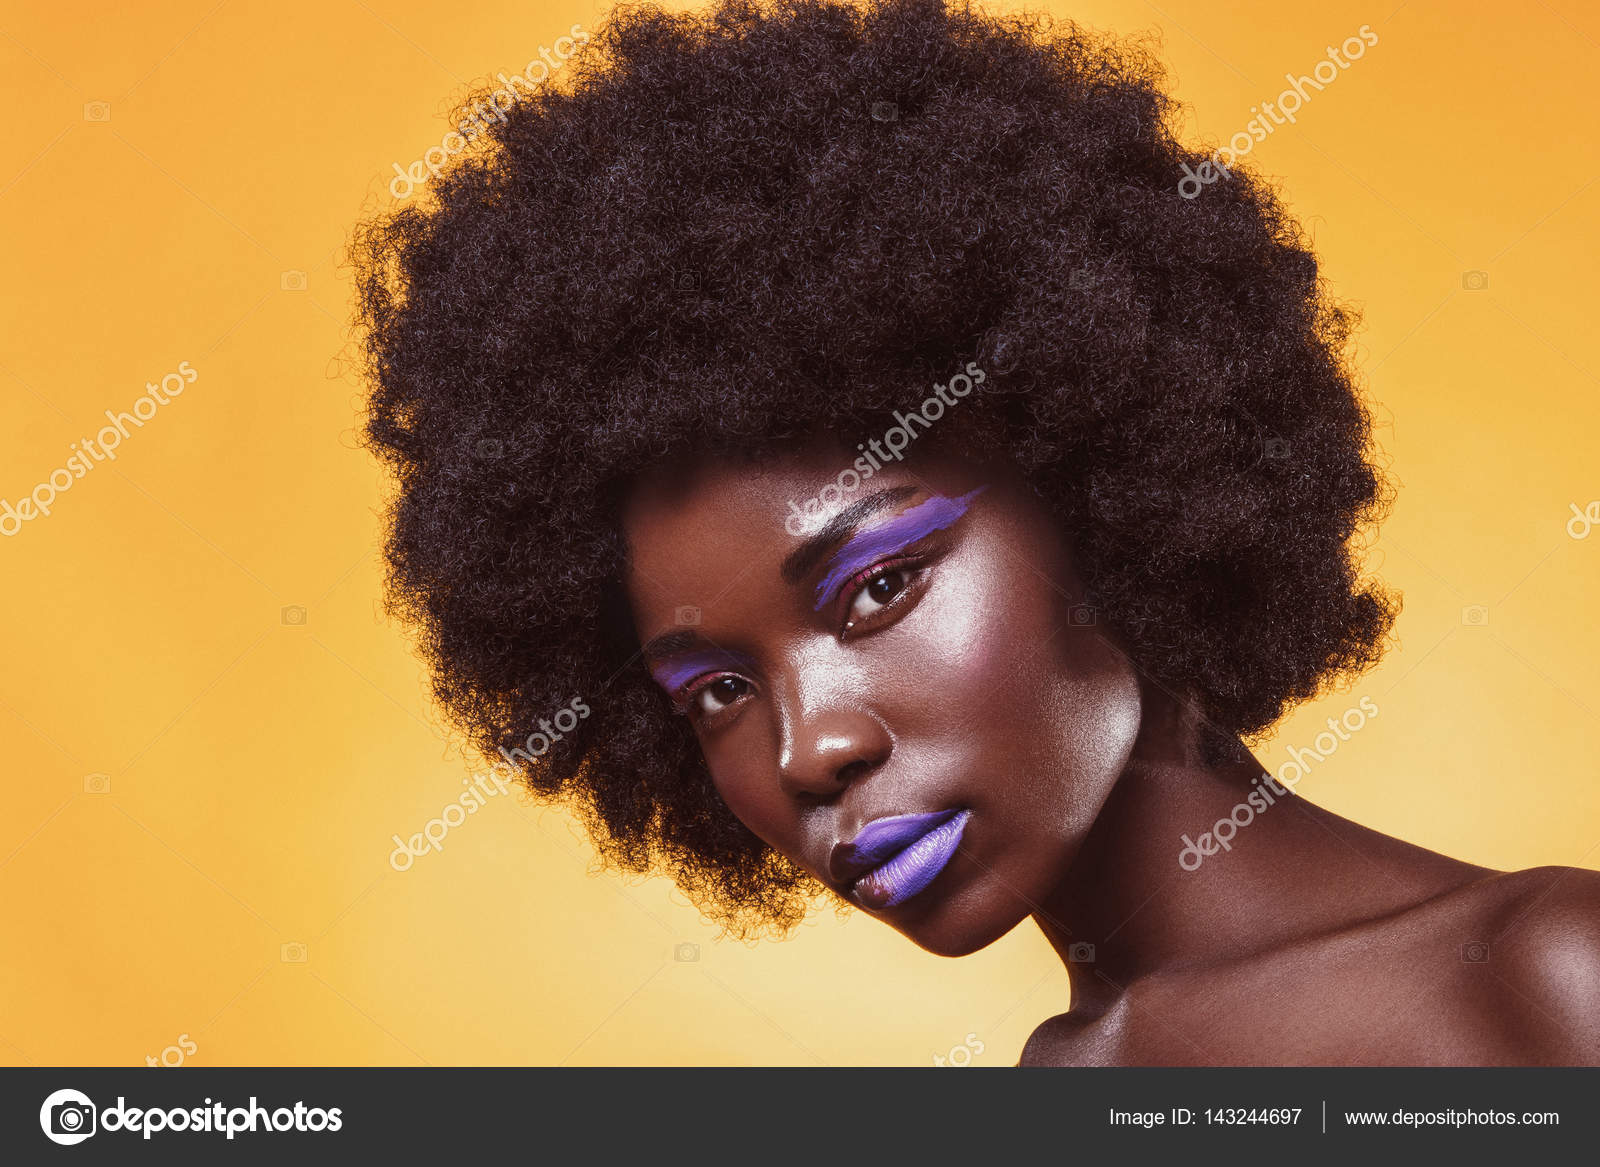 Fashion Woman With A Short Haircut And Black Skin Posing In